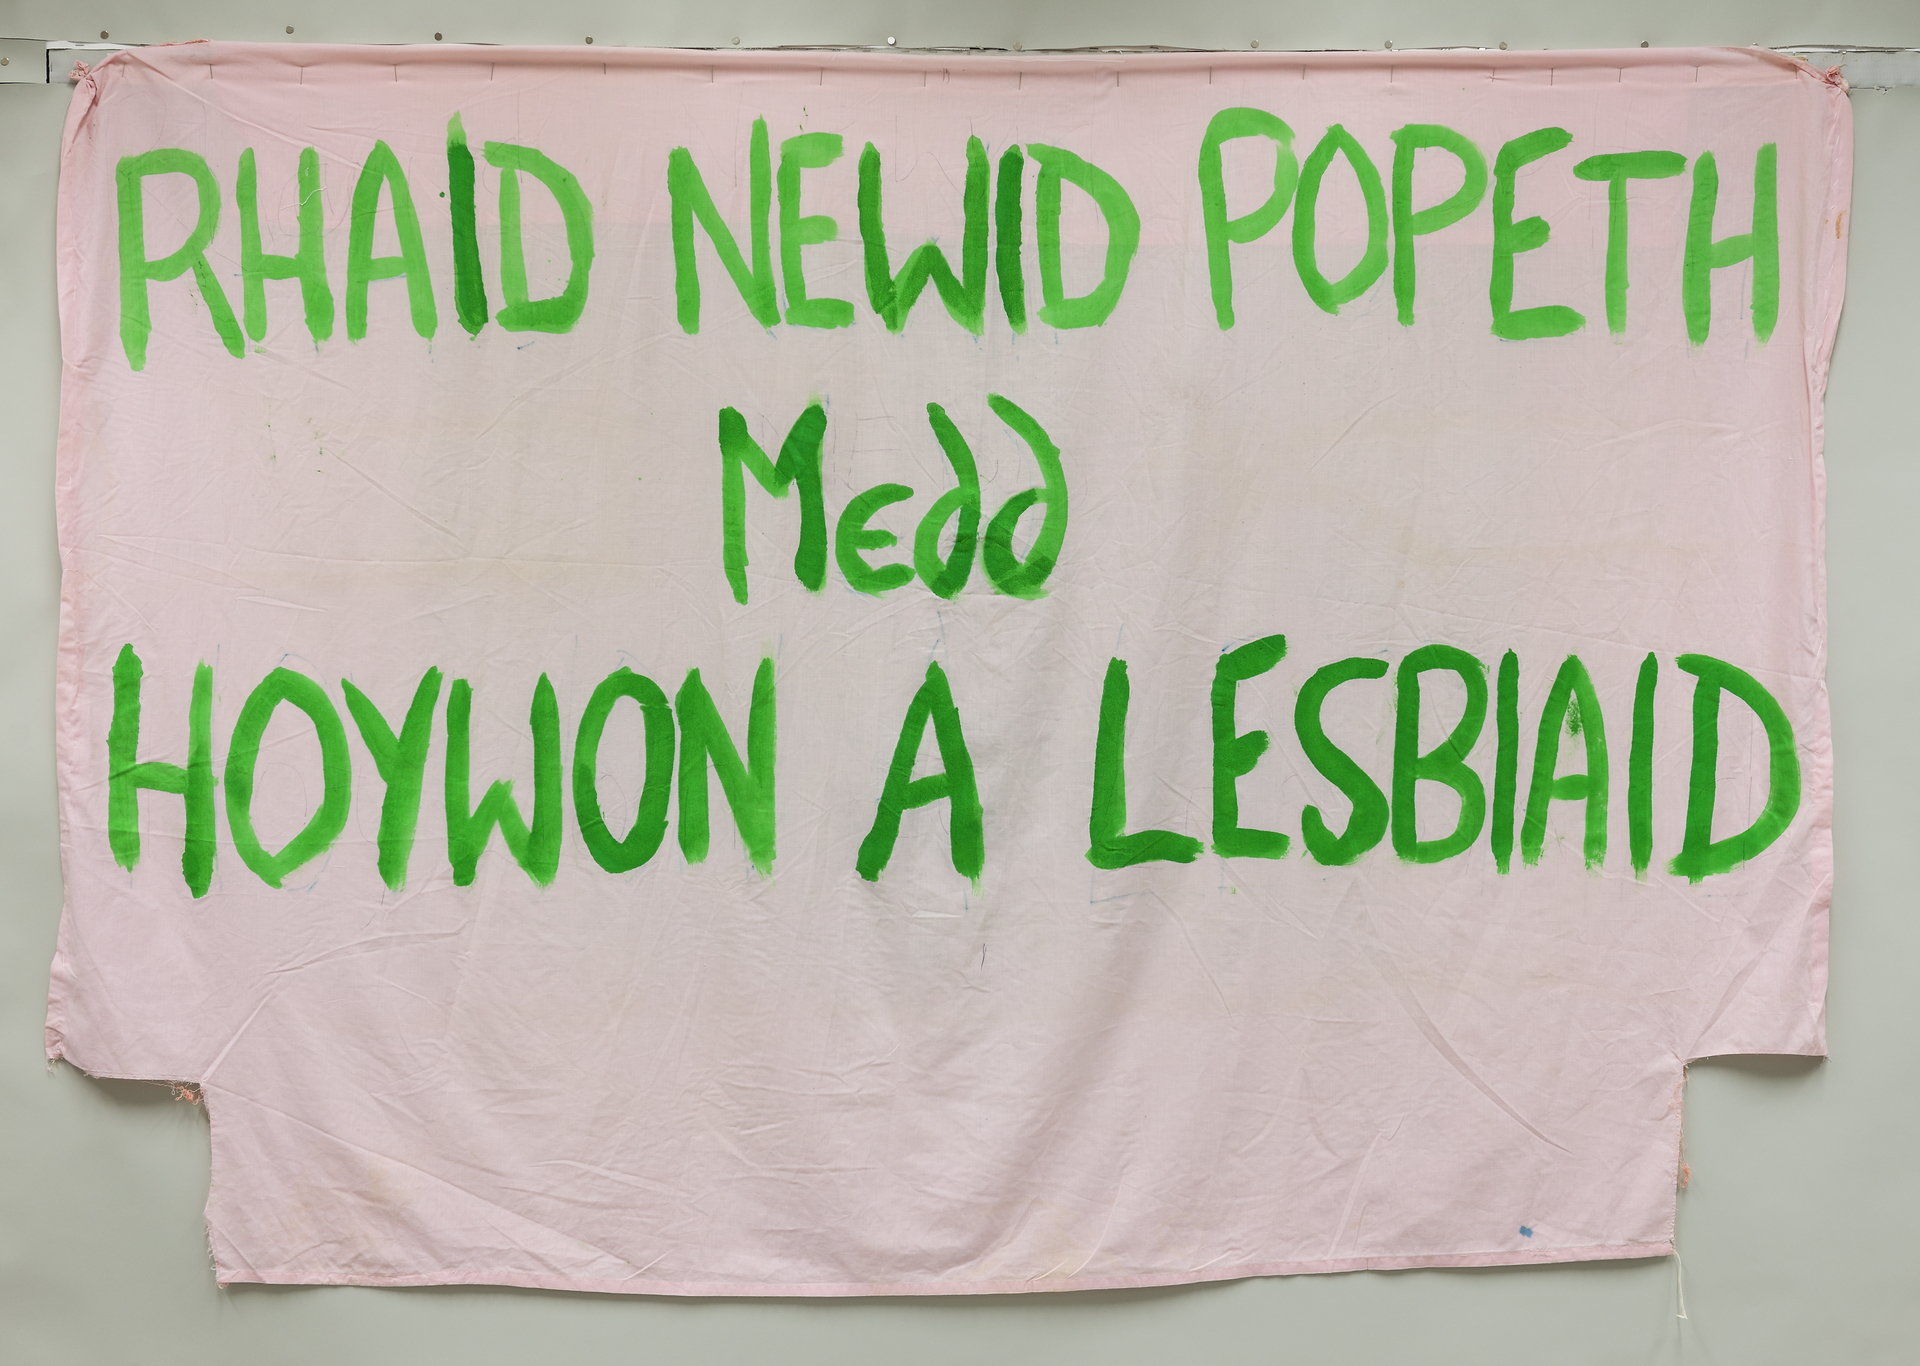 Banner used by CYLCH to protest against Section 28 in a march in Aberystwyth